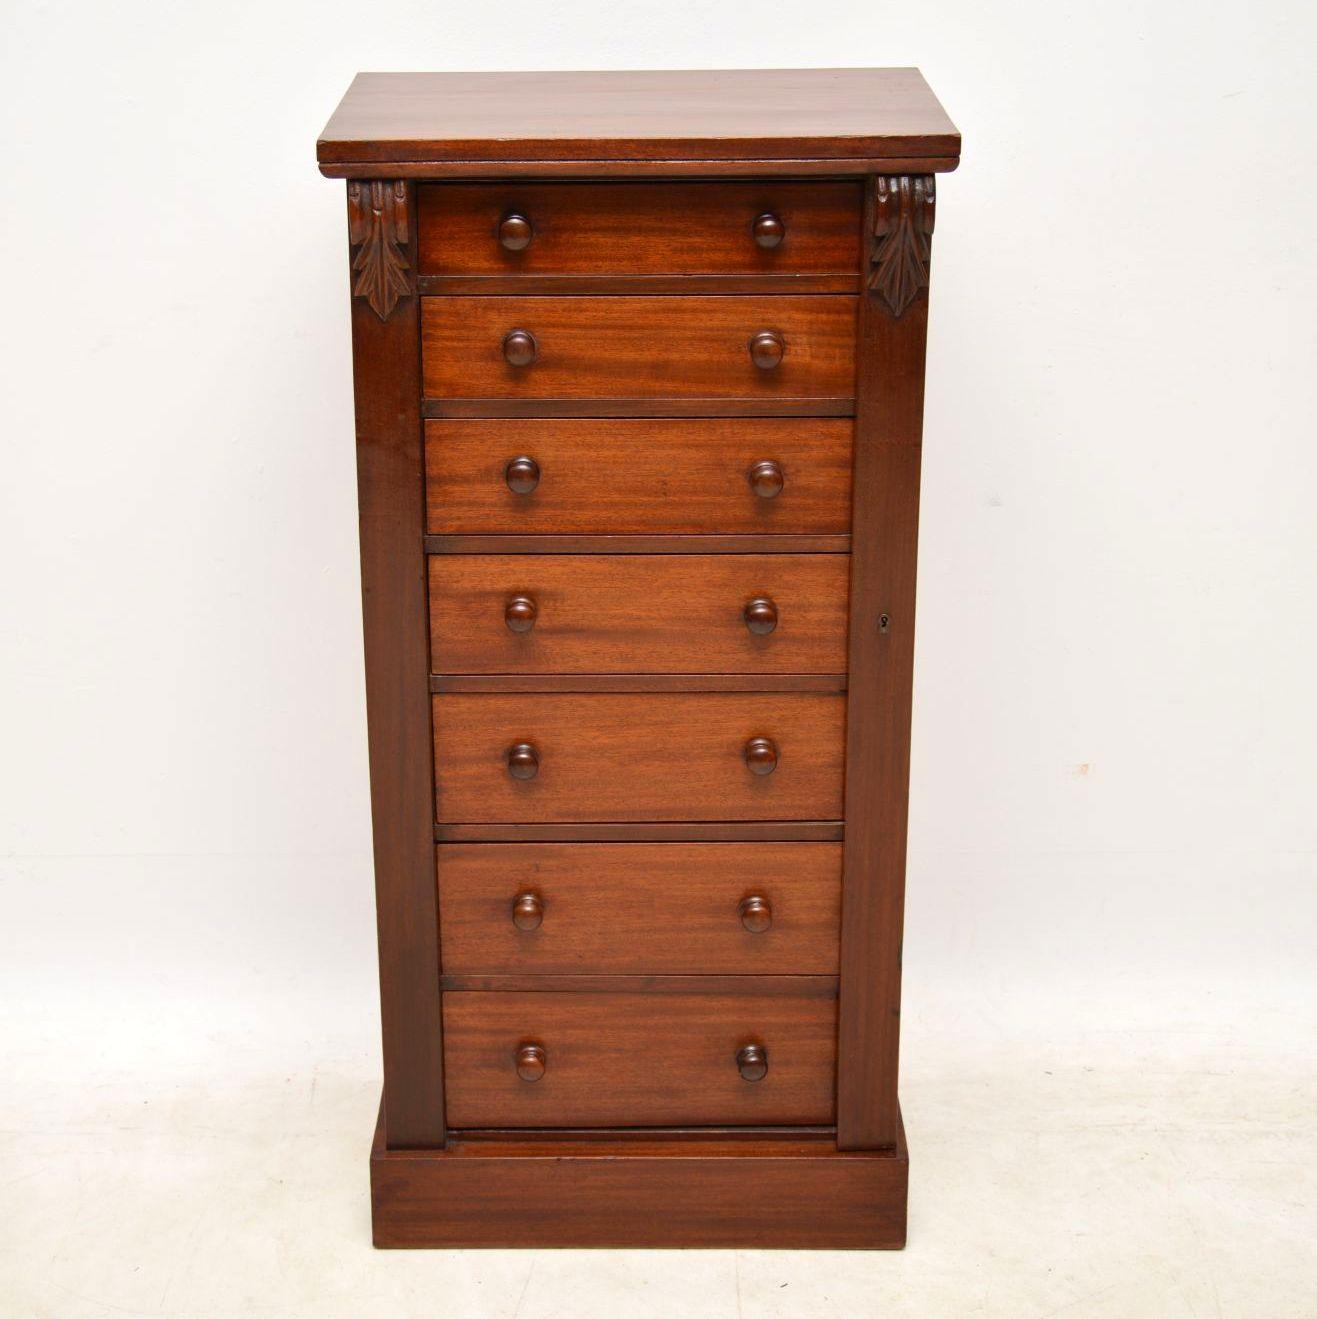 Original antique mahogany Victorian Wellington chest in good condition and dating from around the 1860s-1870s period. Like all these models, it has seven drawers that are graduated in depth and have turned mahogany handles. There is a locking bar on